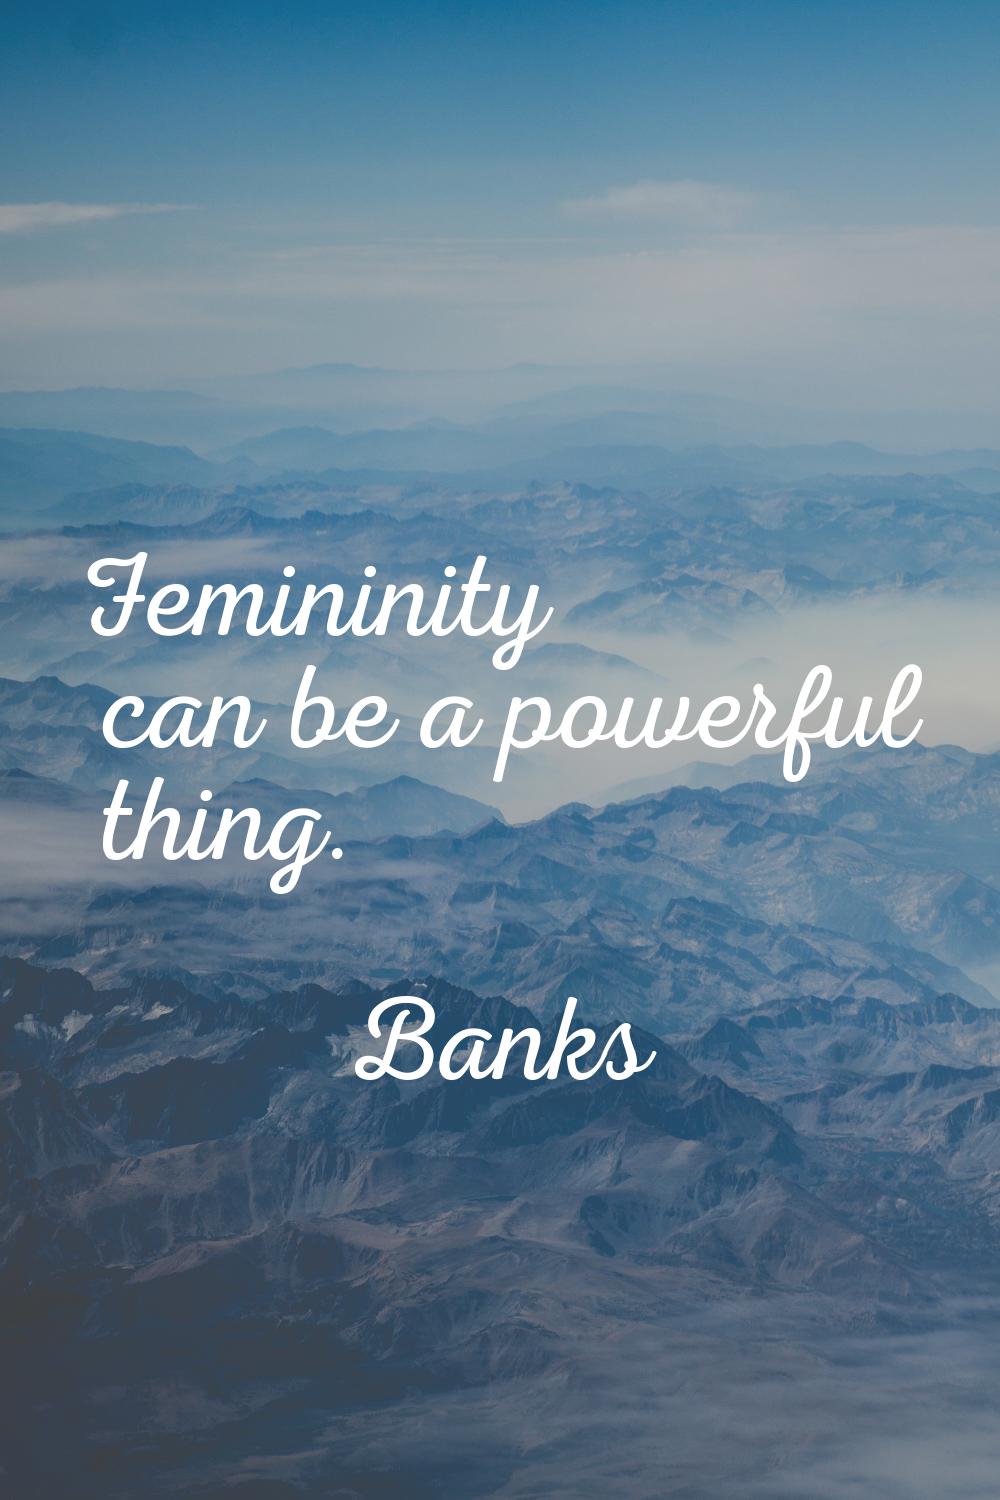 Femininity can be a powerful thing.